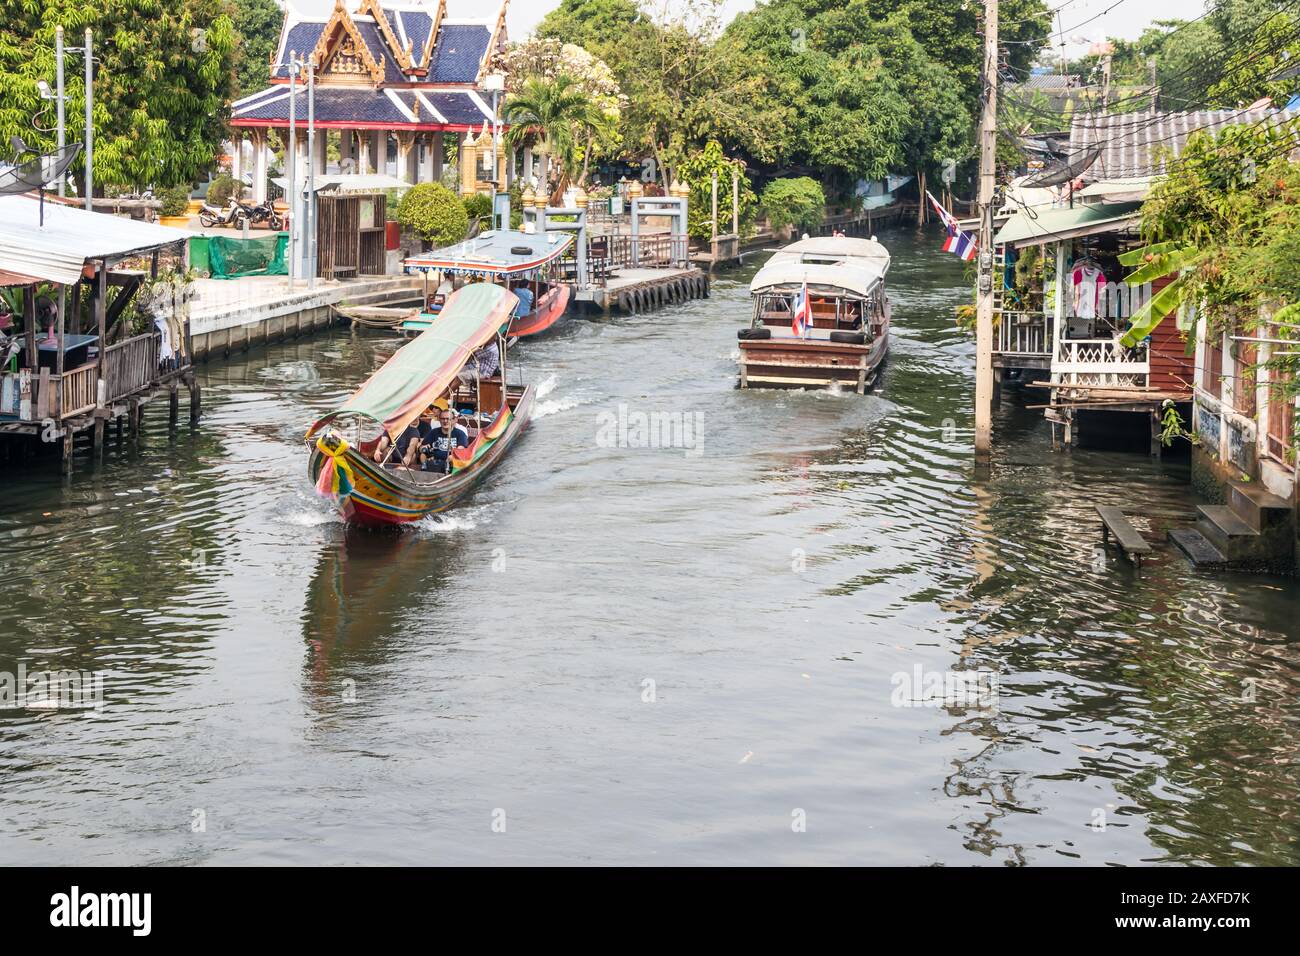 Bangkok, Thailand - January 11th 2020: Tourists boats on the canal at Khlong Bang Luang Floating Market. The area is a popular tourist attraction. Stock Photo